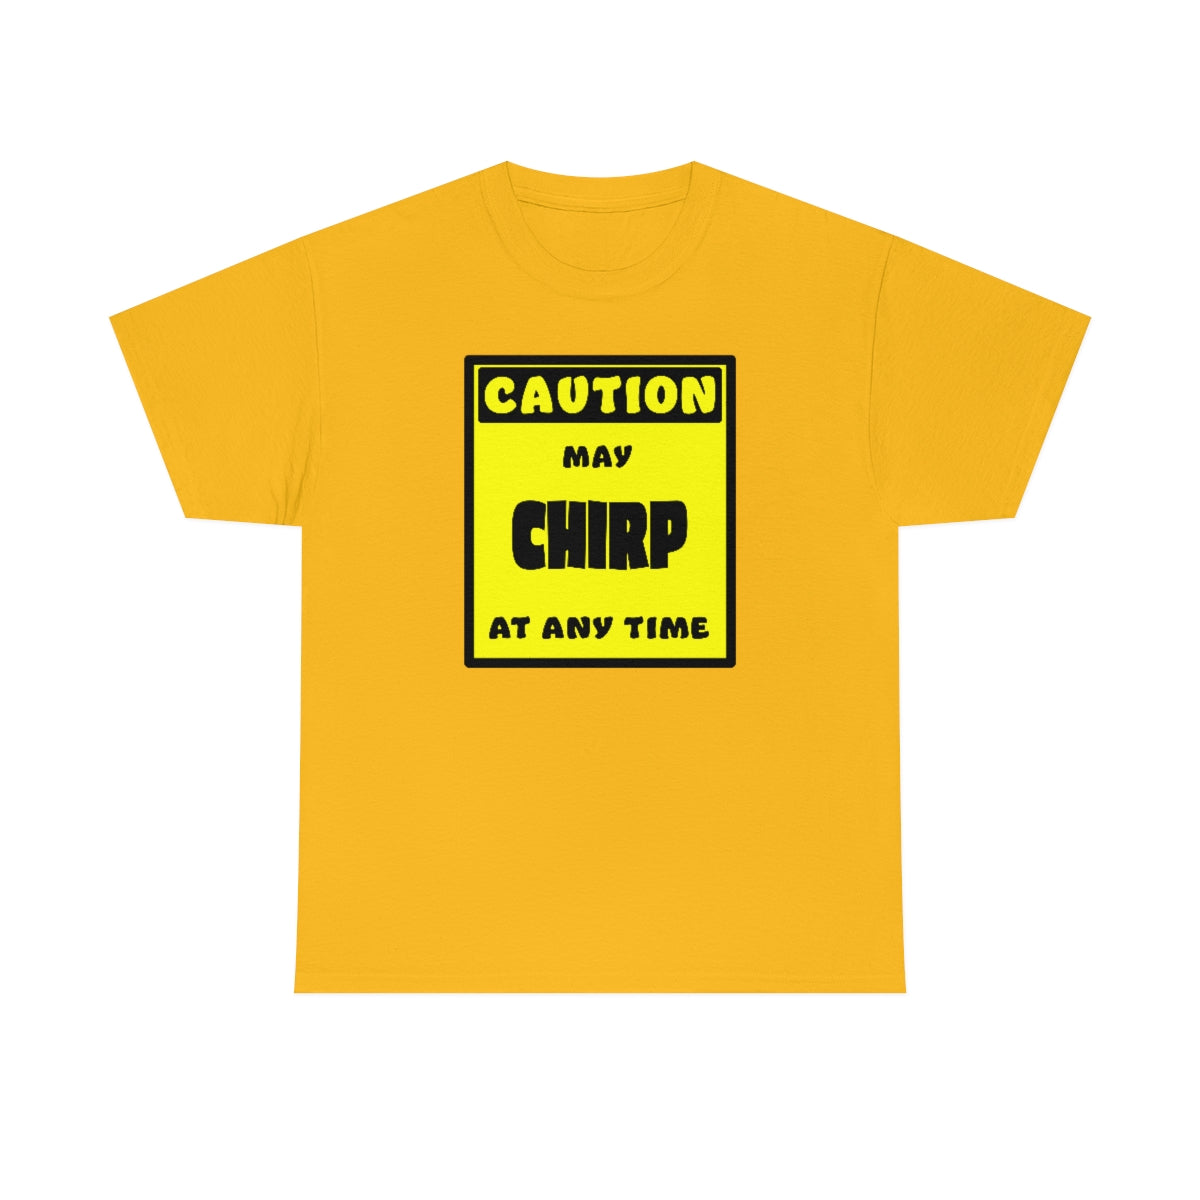 CAUTION! May CHIRP at any time! - T-Shirt T-Shirt AFLT-Whootorca Gold S 